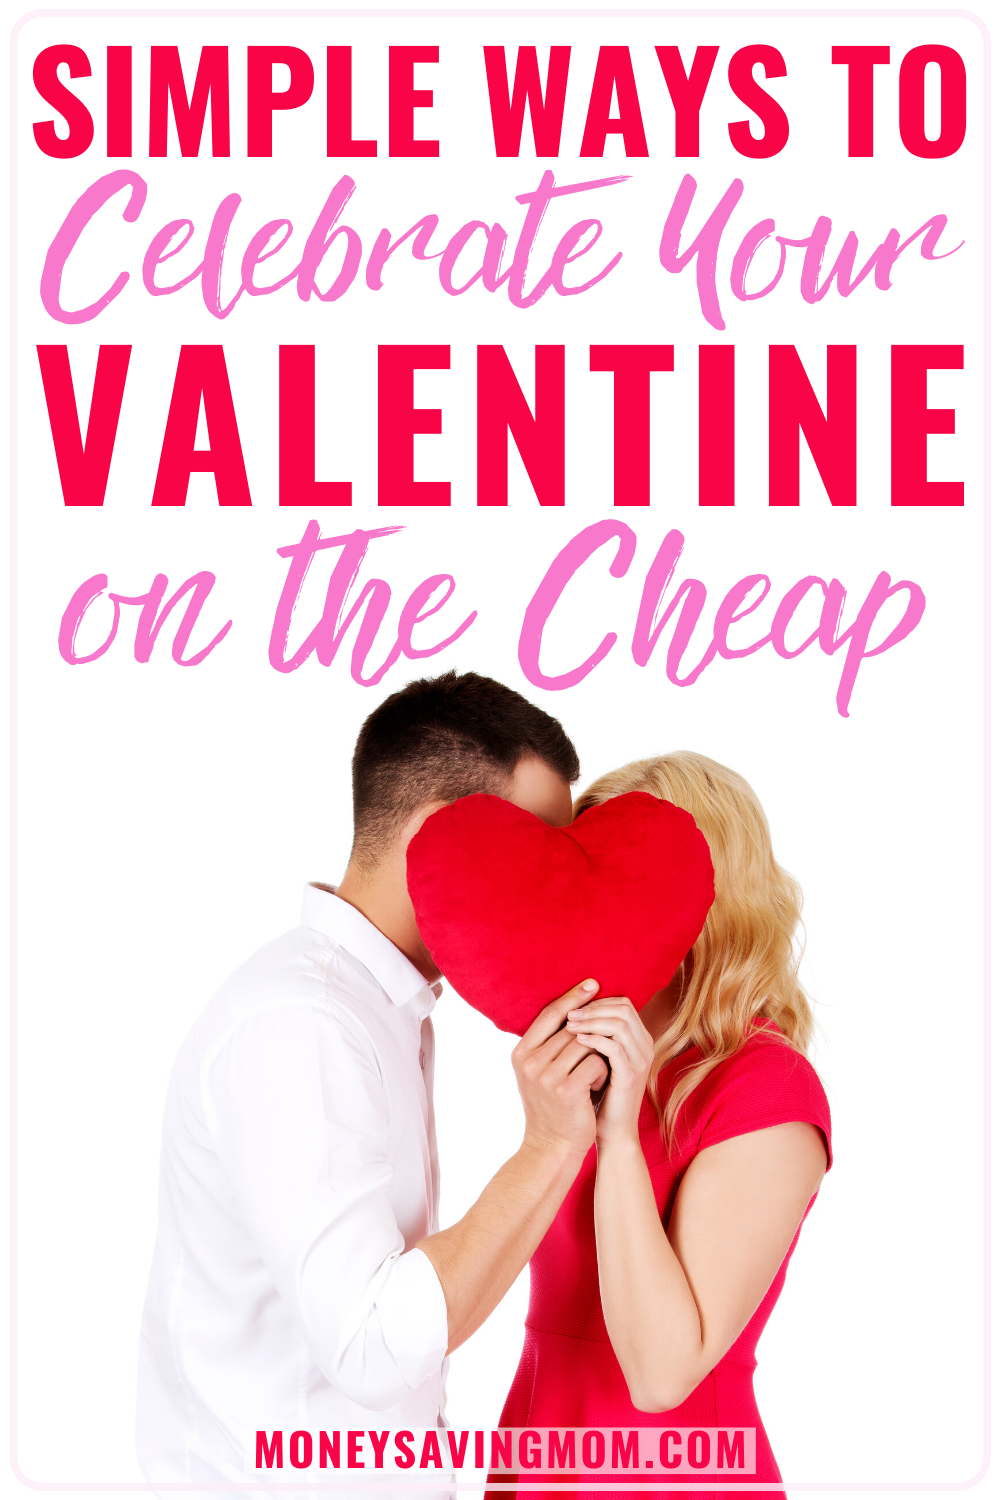 Simple Ways to Celebrate Your Valentine on the Cheap | Money Saving Mom®